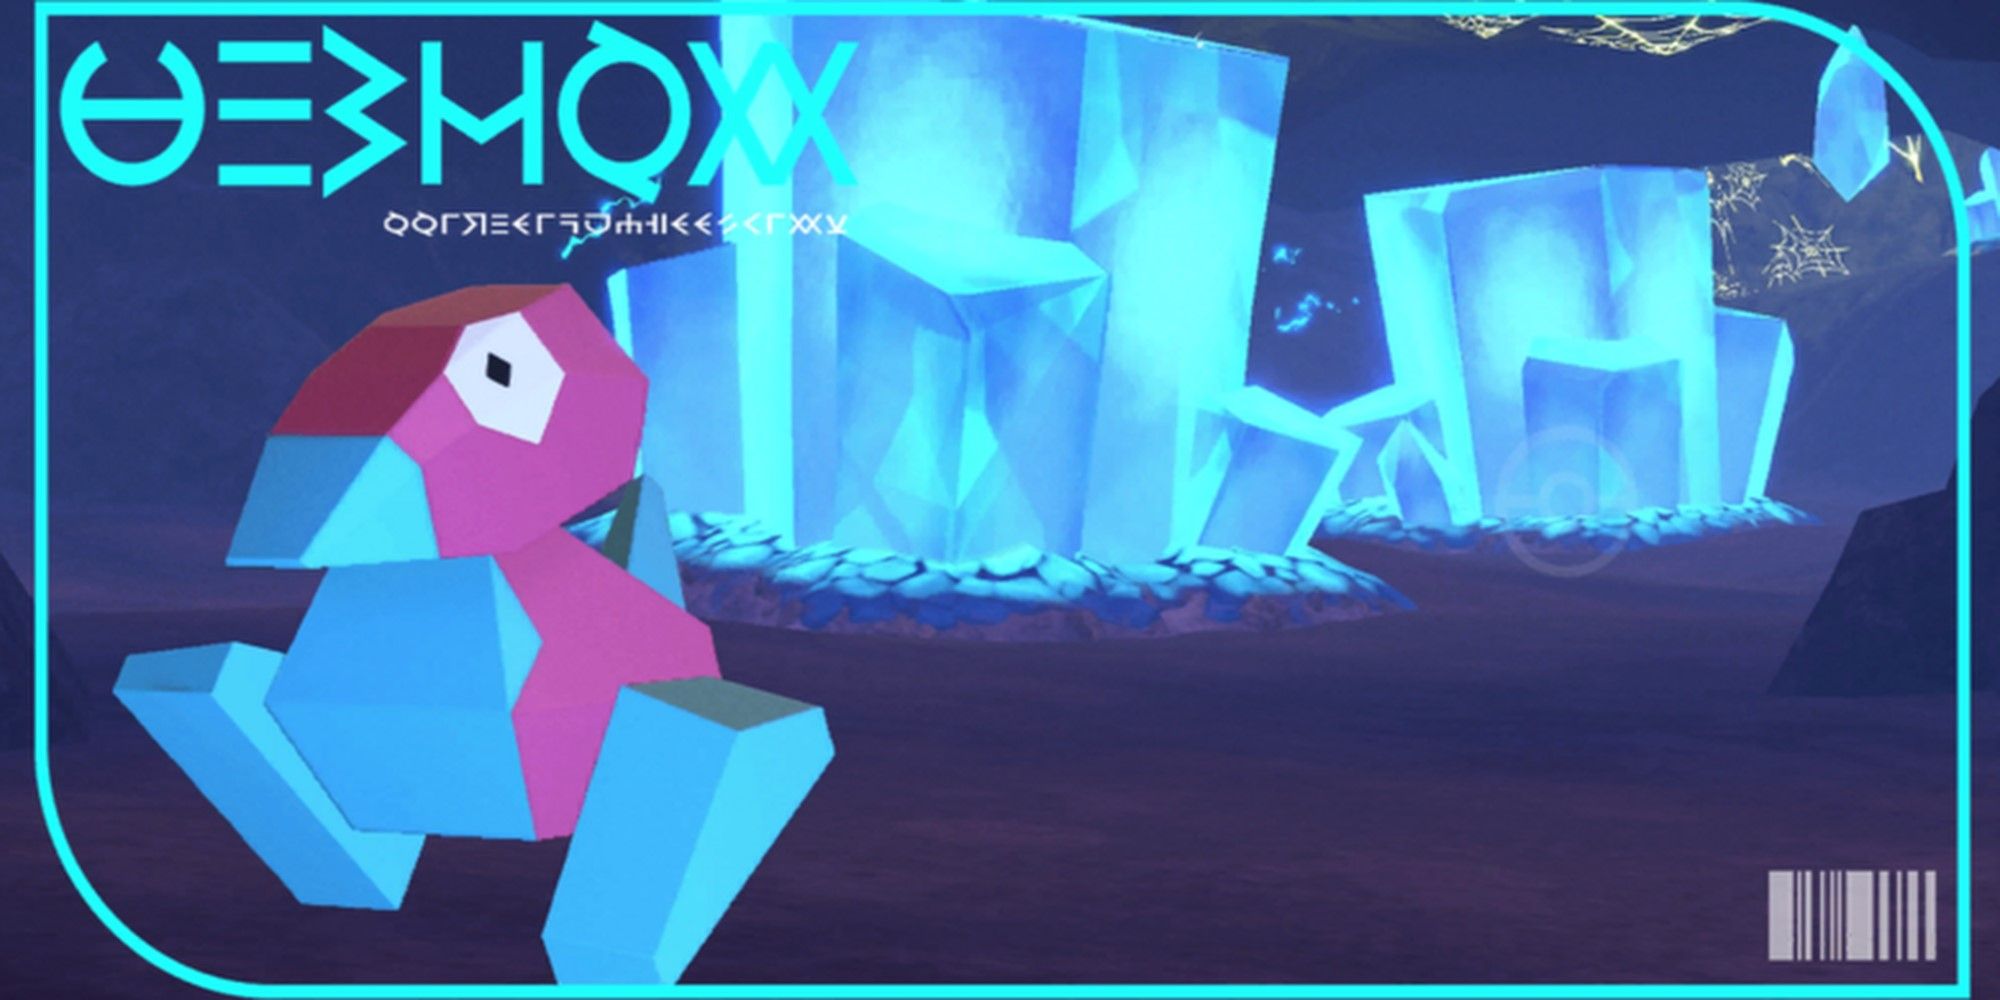 The cover image for Porygon's dex entry in paldea